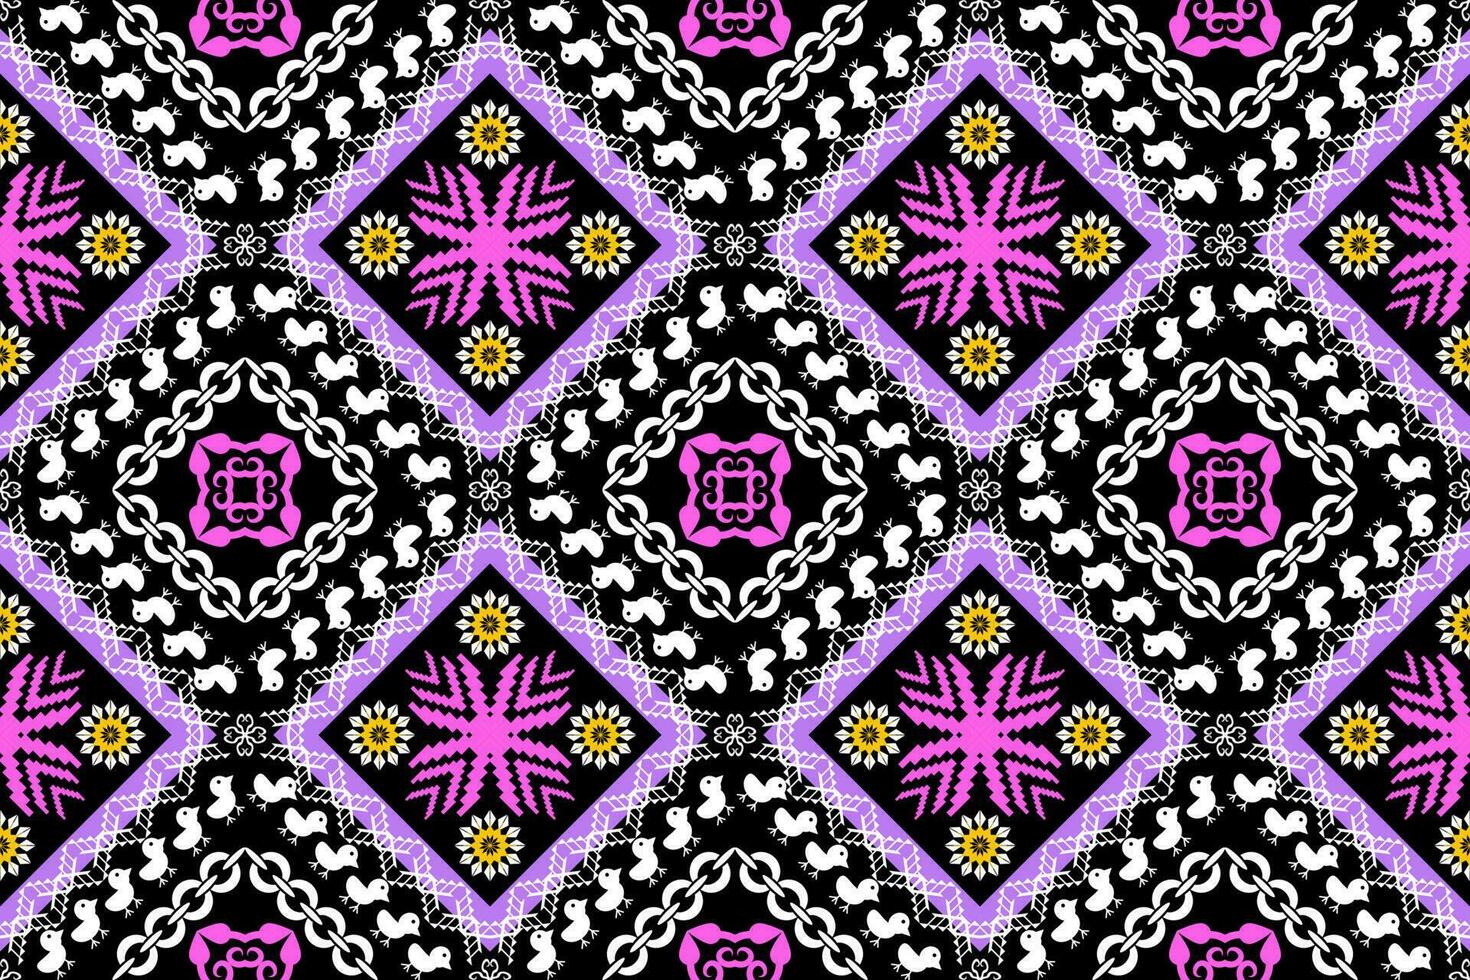 Geometric ethnic oriental traditional art pattern.Figure aztec embroidery style.Design for ethnic background,wallpaper,clothing,wrapping,fabric,element,sarong,vector illustration vector